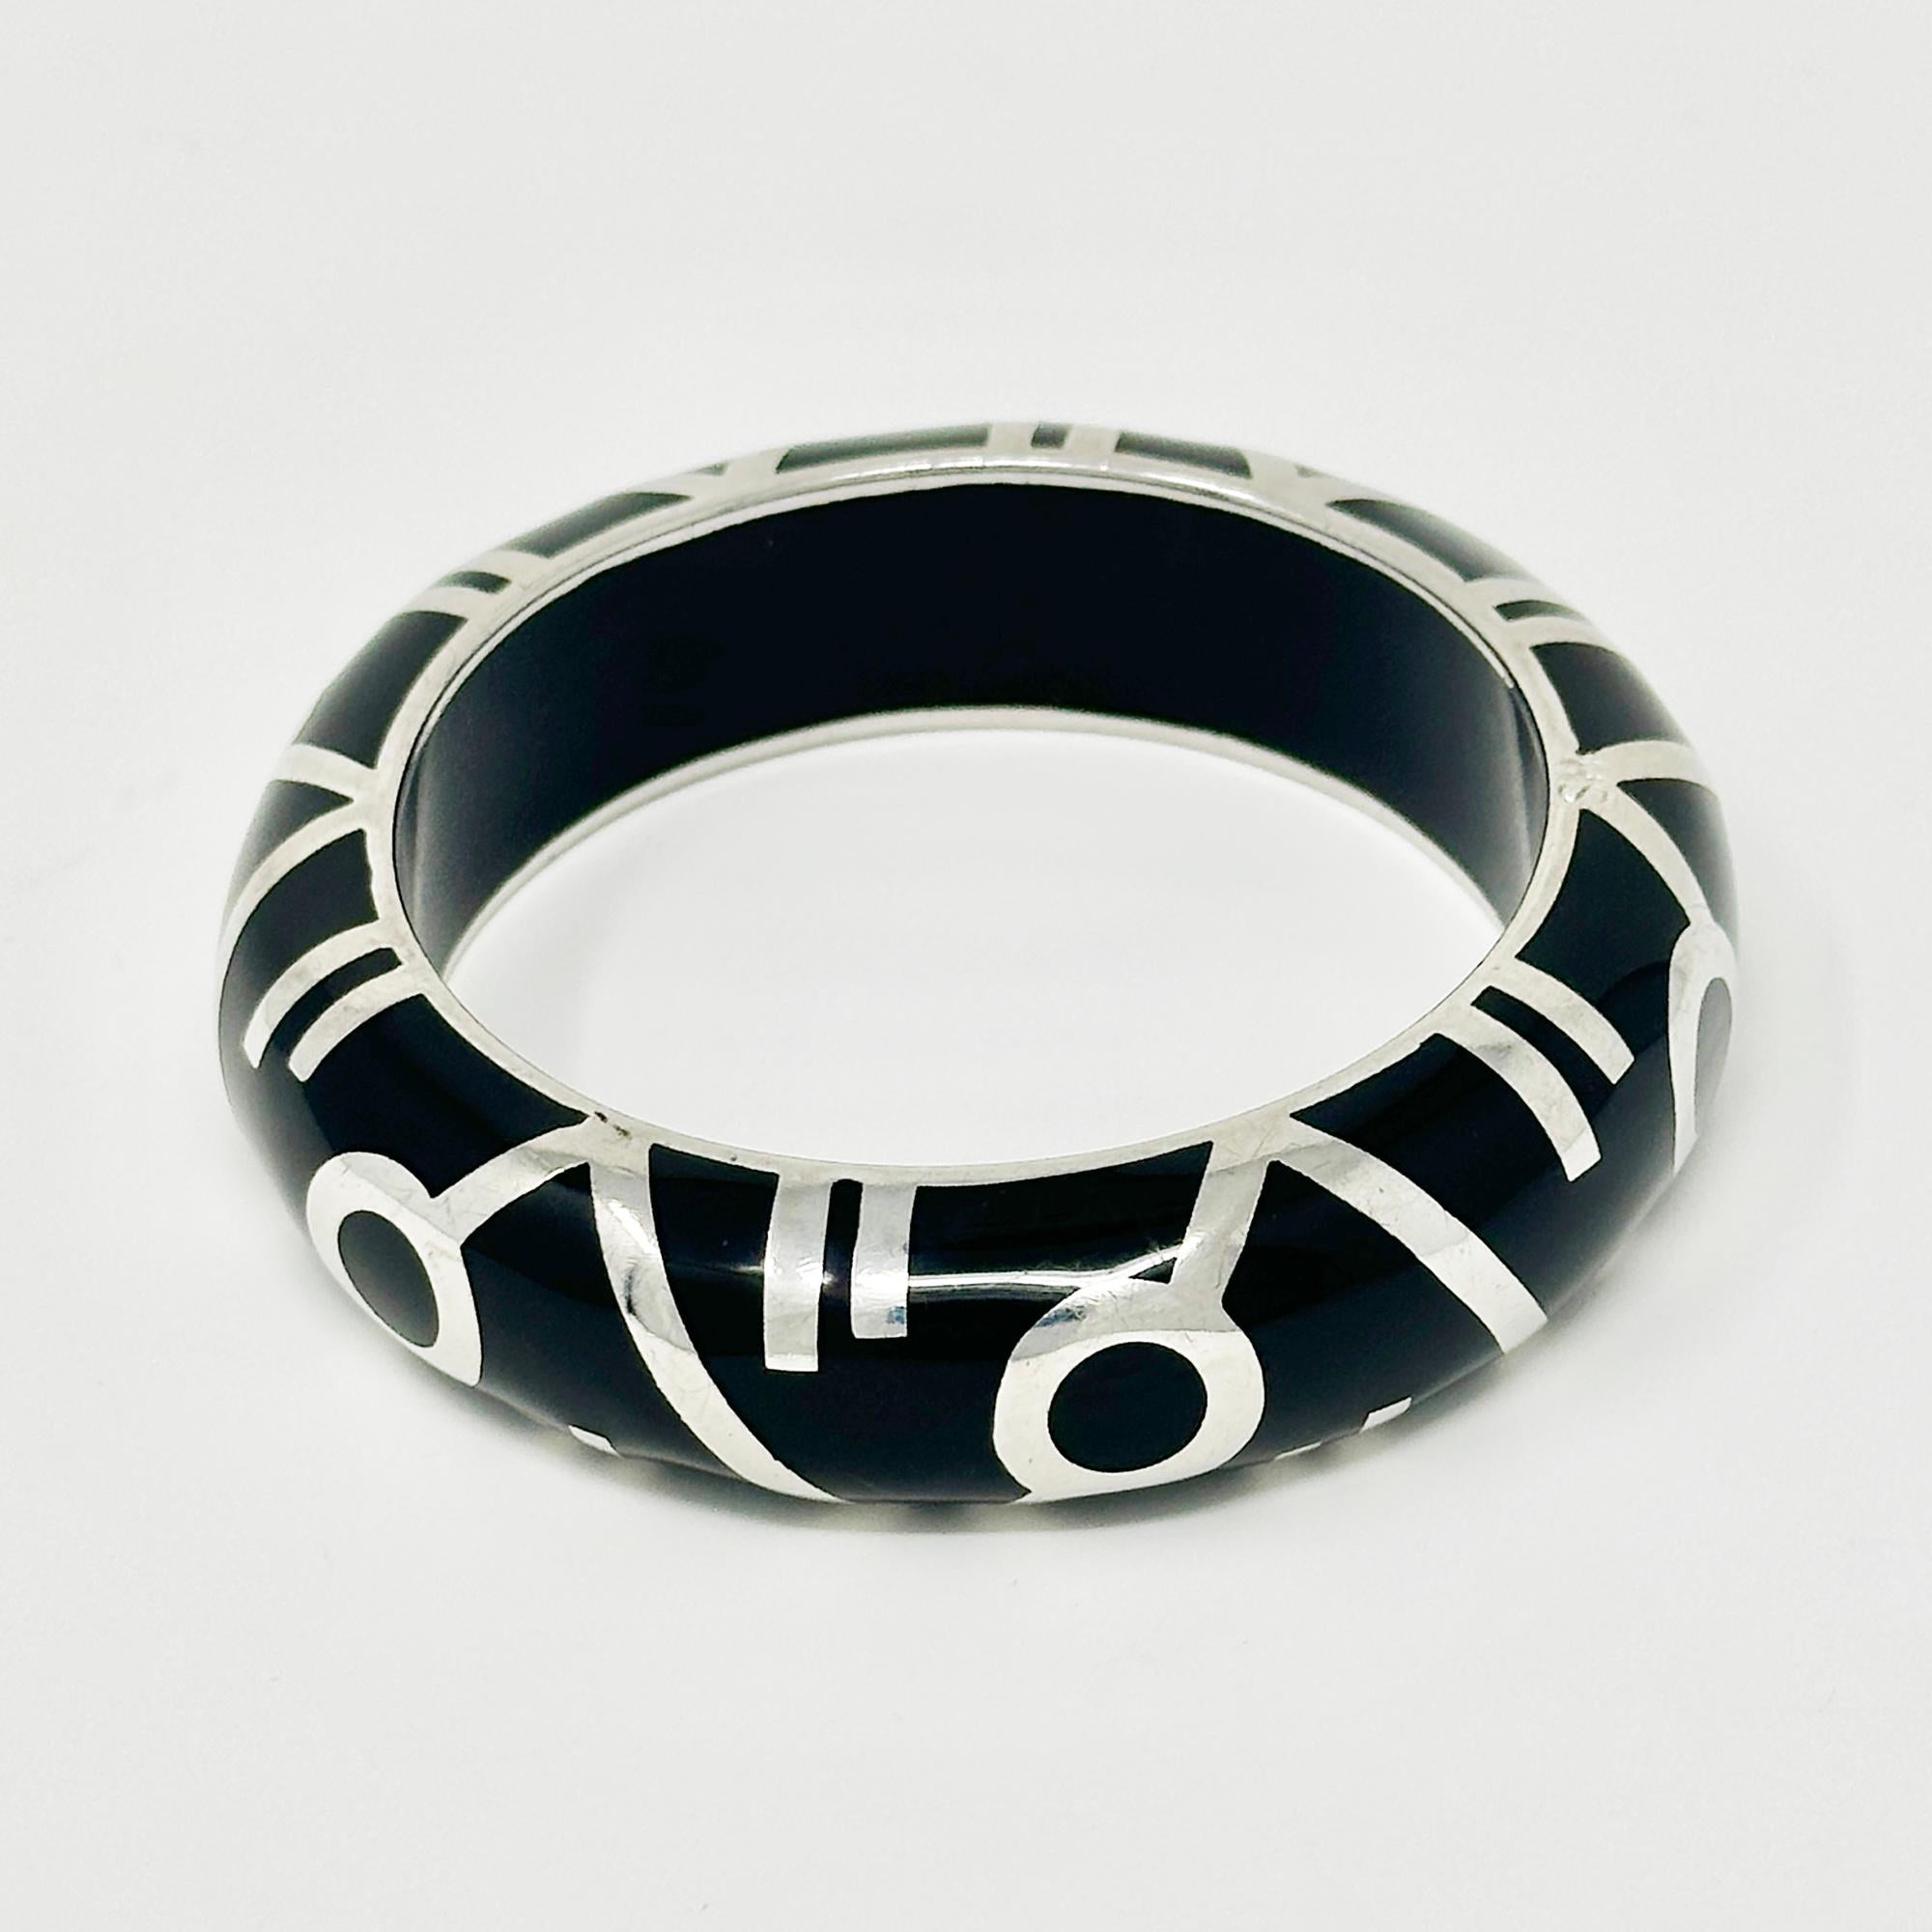 Artisan Sean Hill Silver and Resin Bracelet For Sale